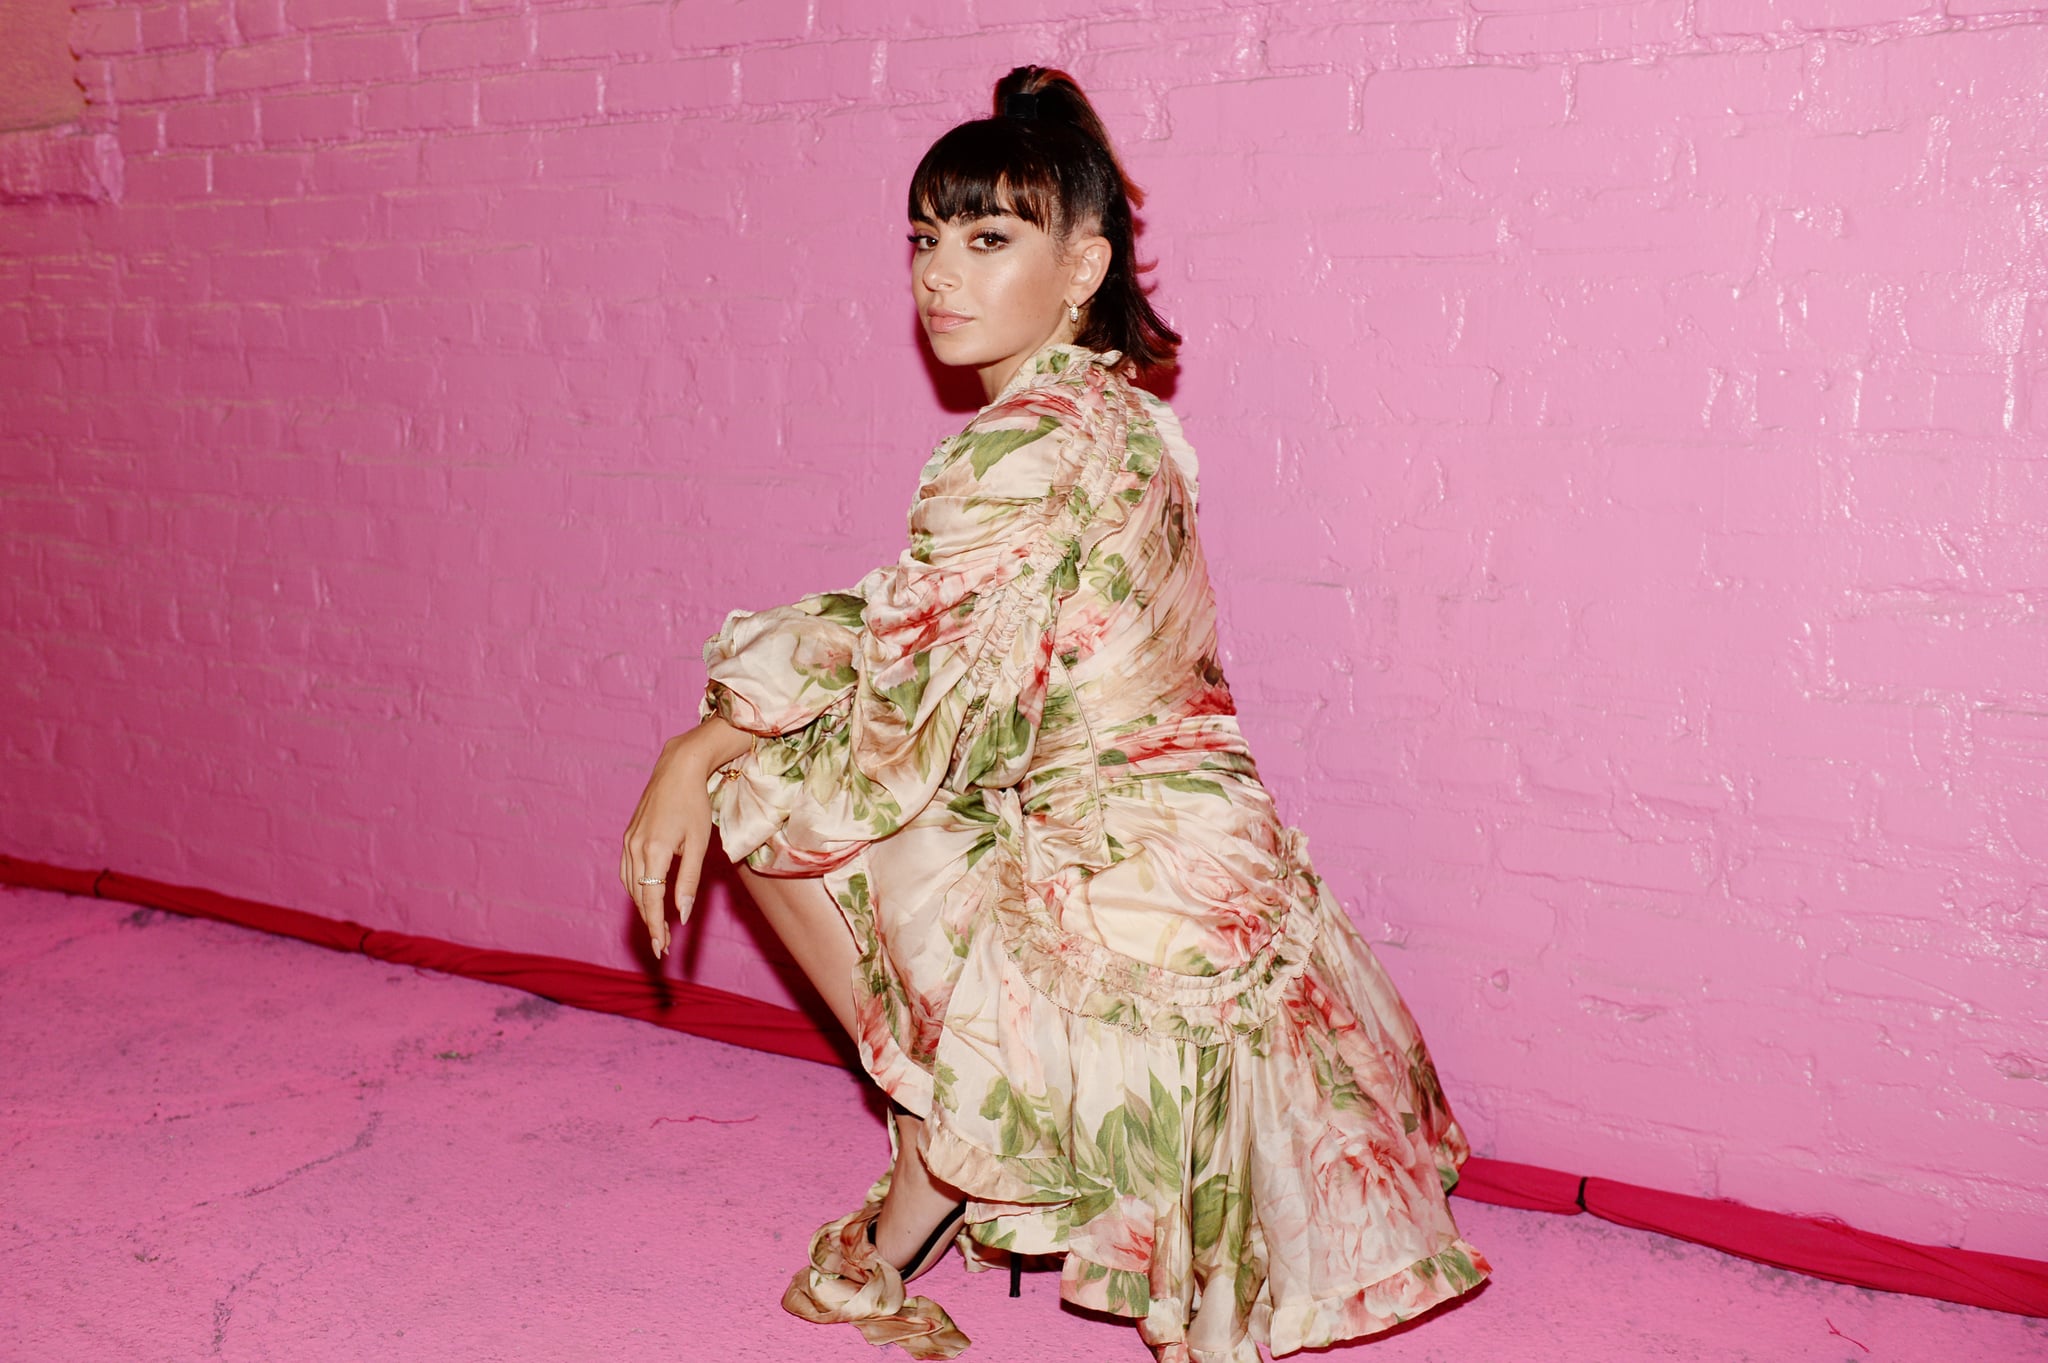 LOS ANGELES, CALIFORNIA - AUGUST 28: Charli XCX attends Pandora Street Of Loves on August 28, 2019 in Los Angeles, California. (Photo by Andrew Toth/Getty Images for Pandora)